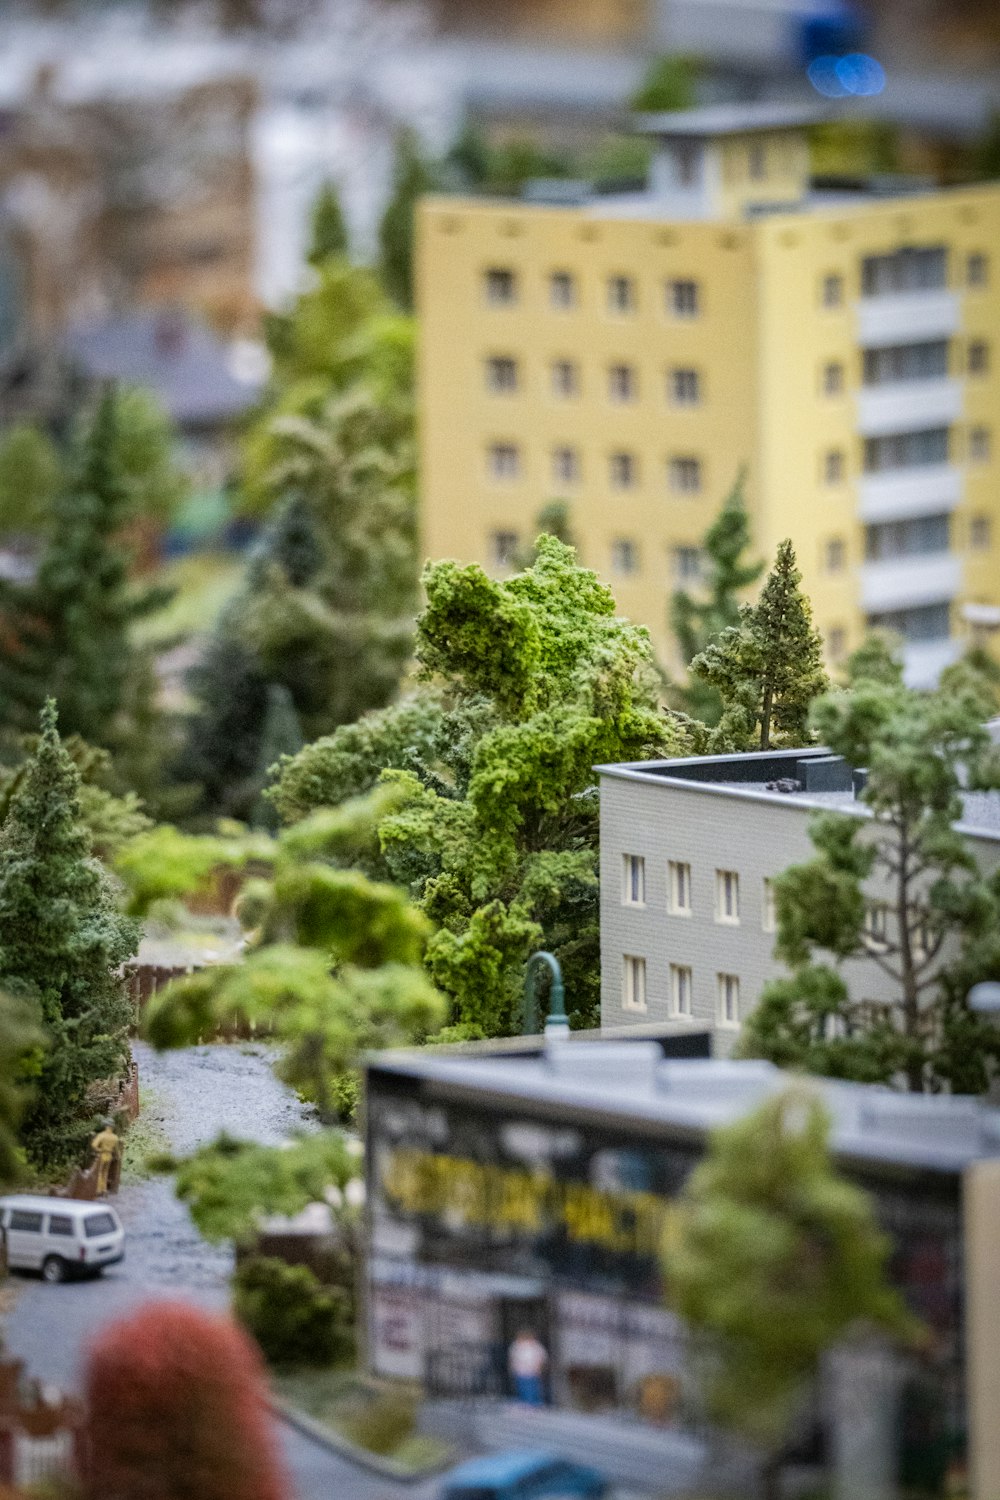 a model of a city with trees and buildings